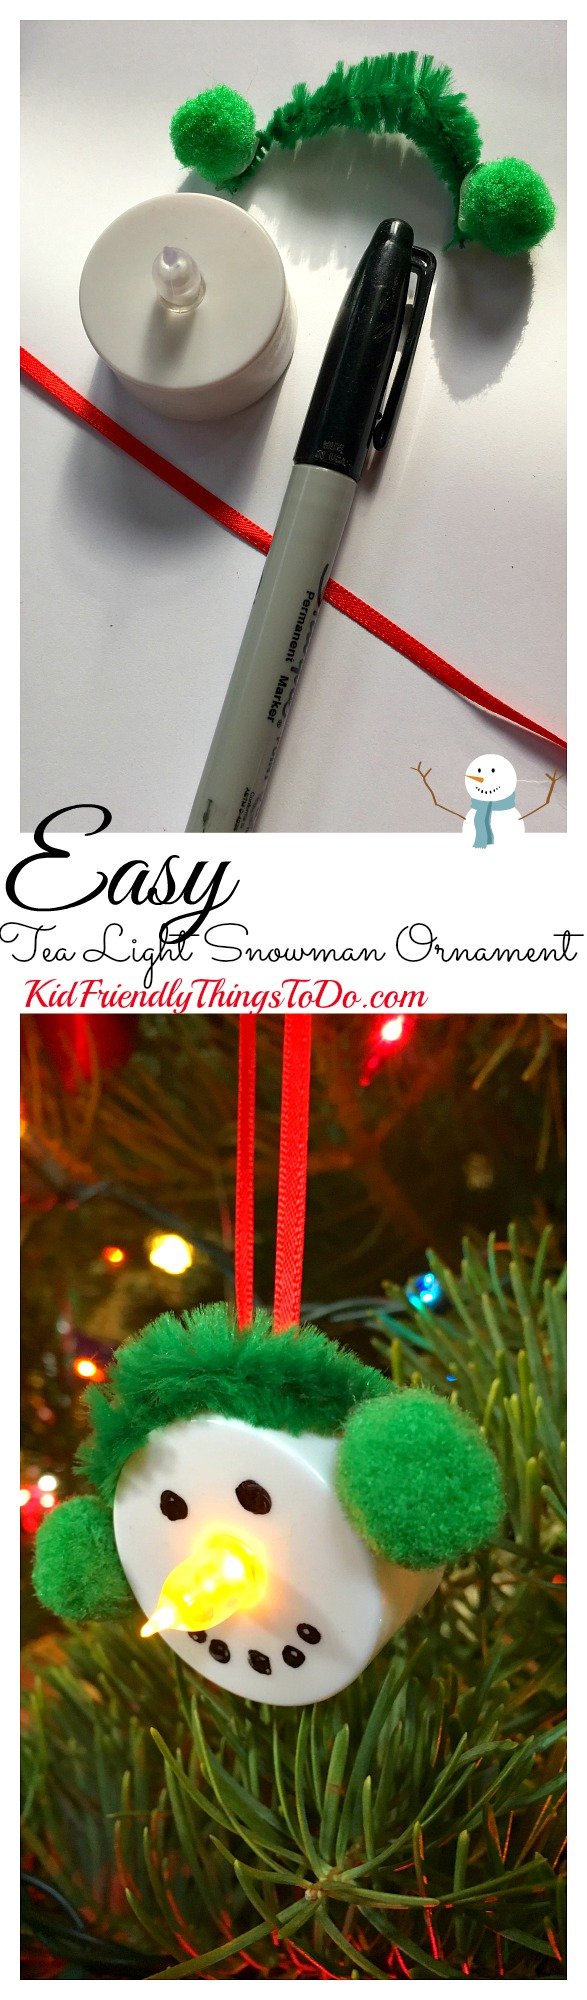 Easy Snowman Tea Light Ornament Craft for the perfect stress free craft with kids! - Great for a classroom party - KidFriendlyThingsToDo.com